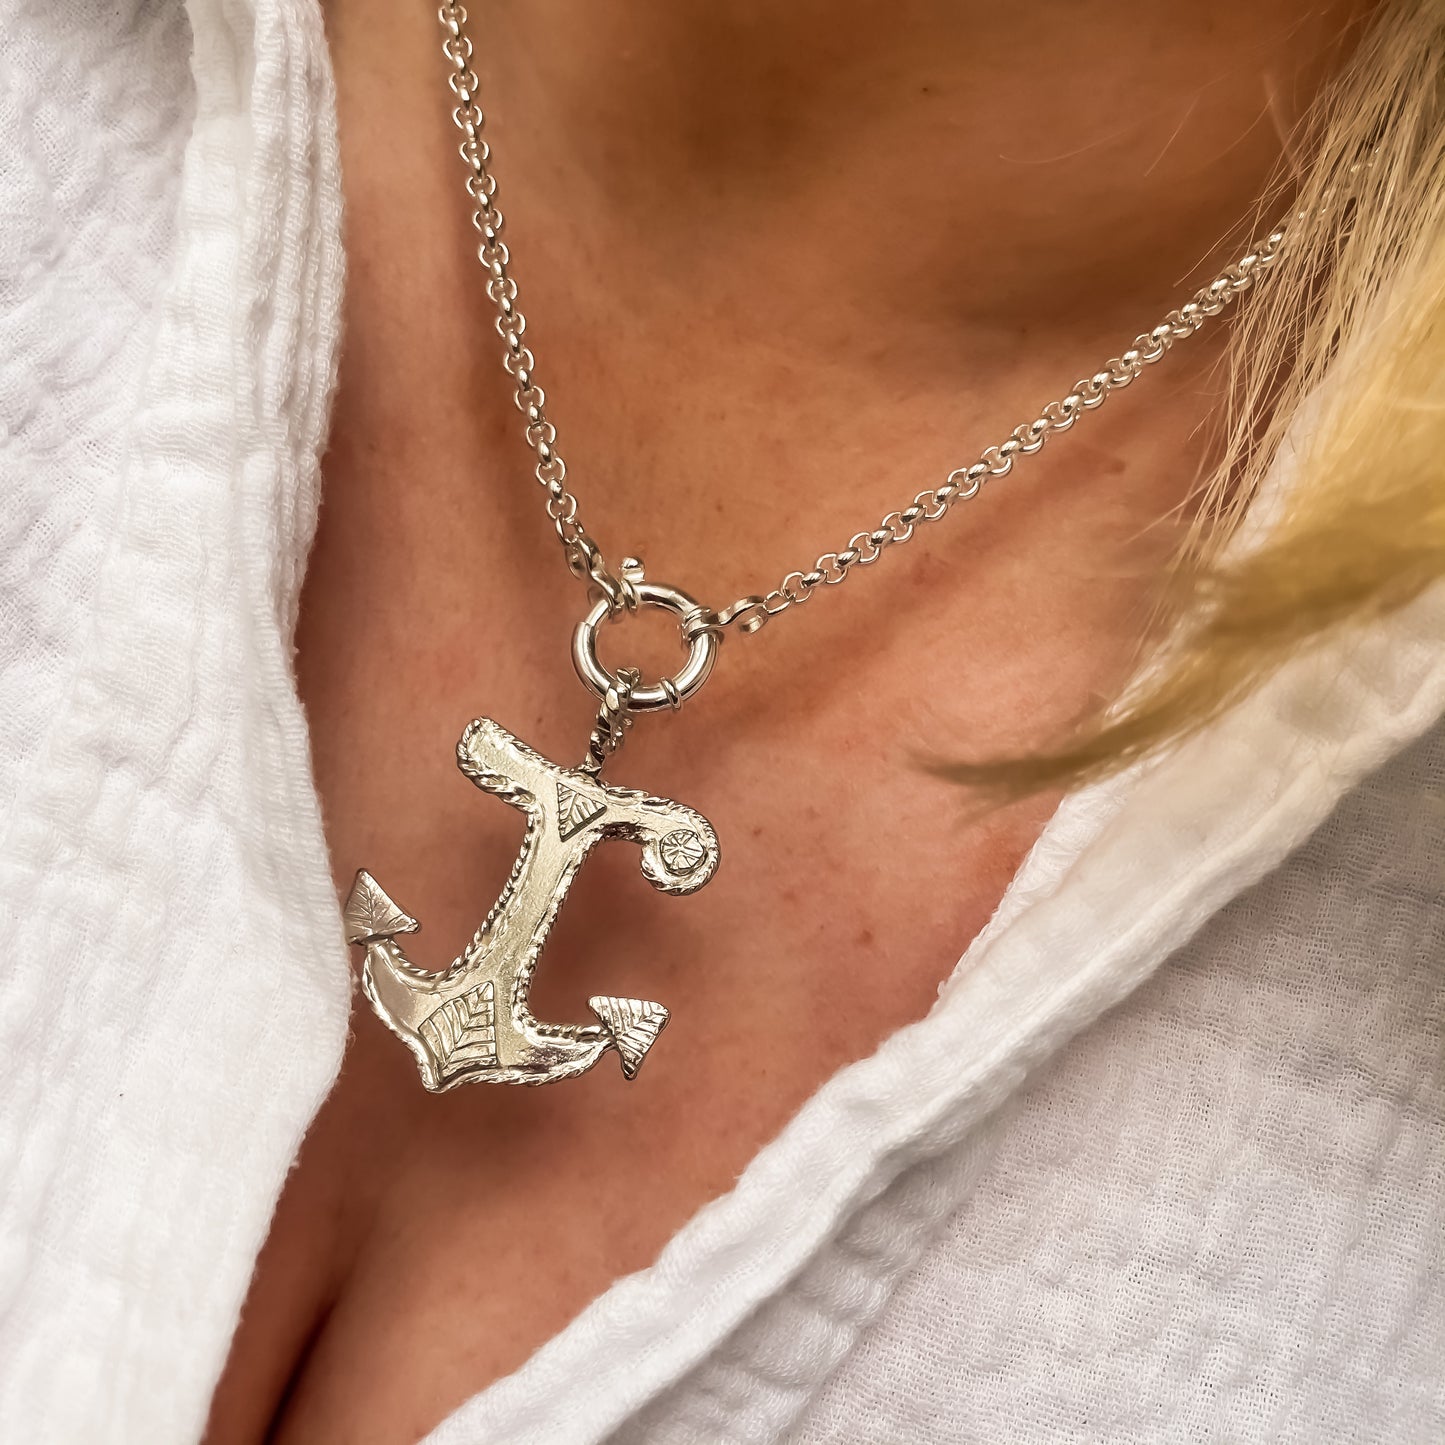 Steadfast Anchor - Sterling Silver